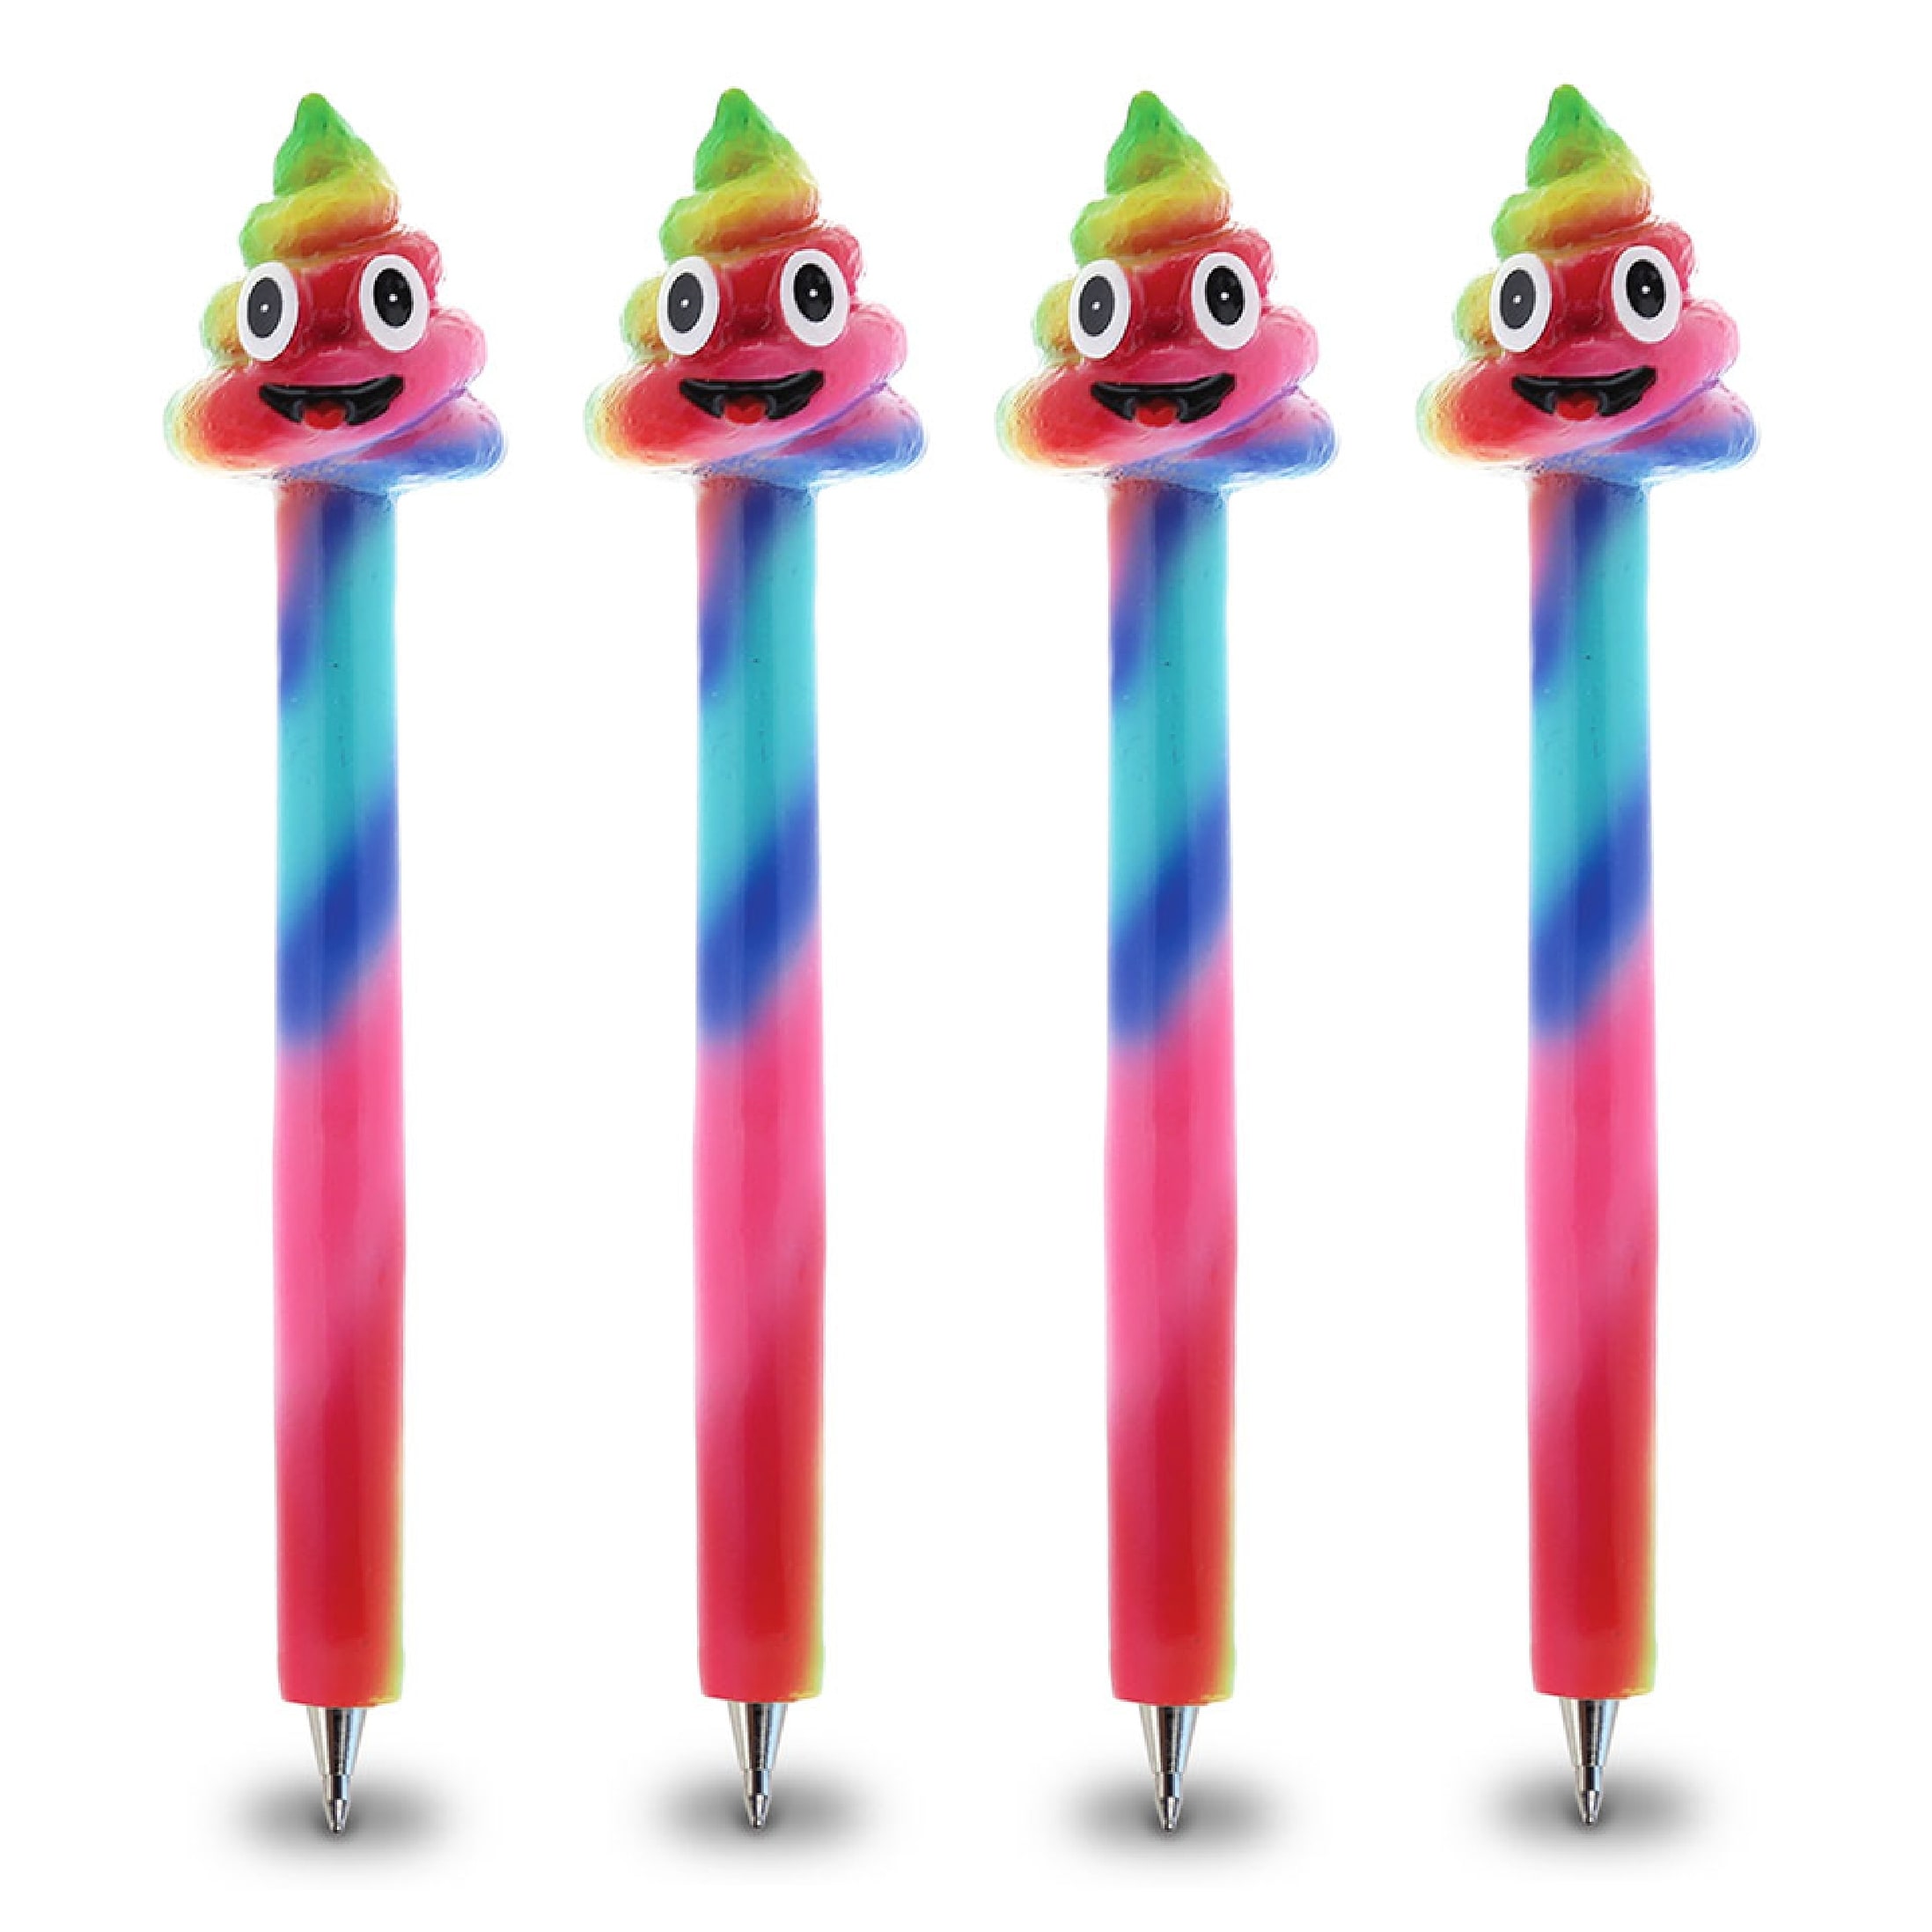 Planet Pens Bundle of Poop Rainbow Emotion Novelty Ballpoint Pens - 6 inches long